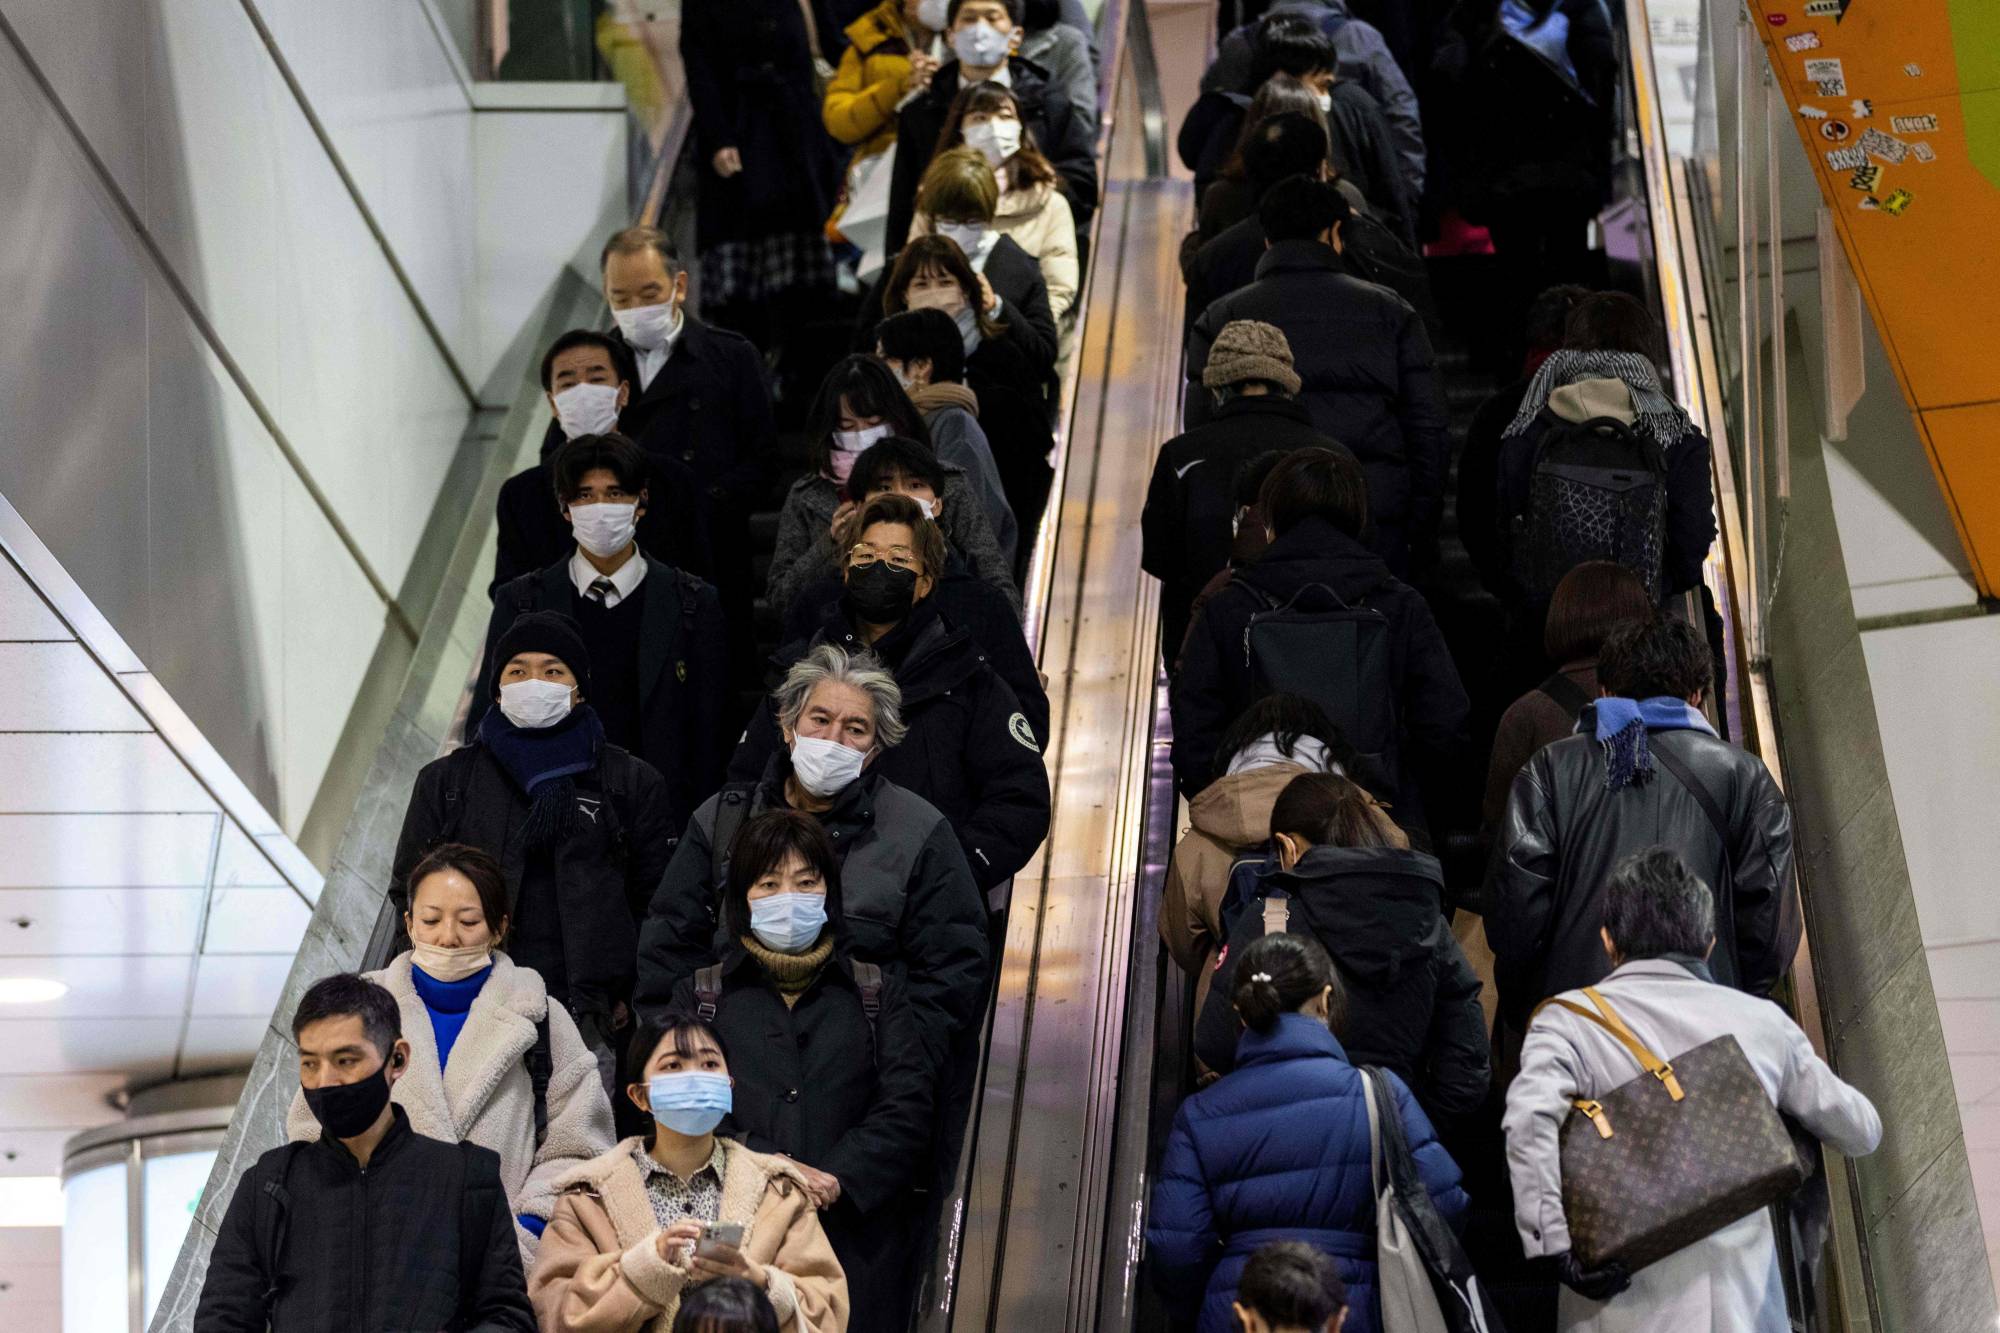 People in Tokyo's Shibuya district on Jan. 19. In Japan, labor unions and the management side are said to focus more on simply protecting employment itself rather than on raising wages. | AFP-JIJI